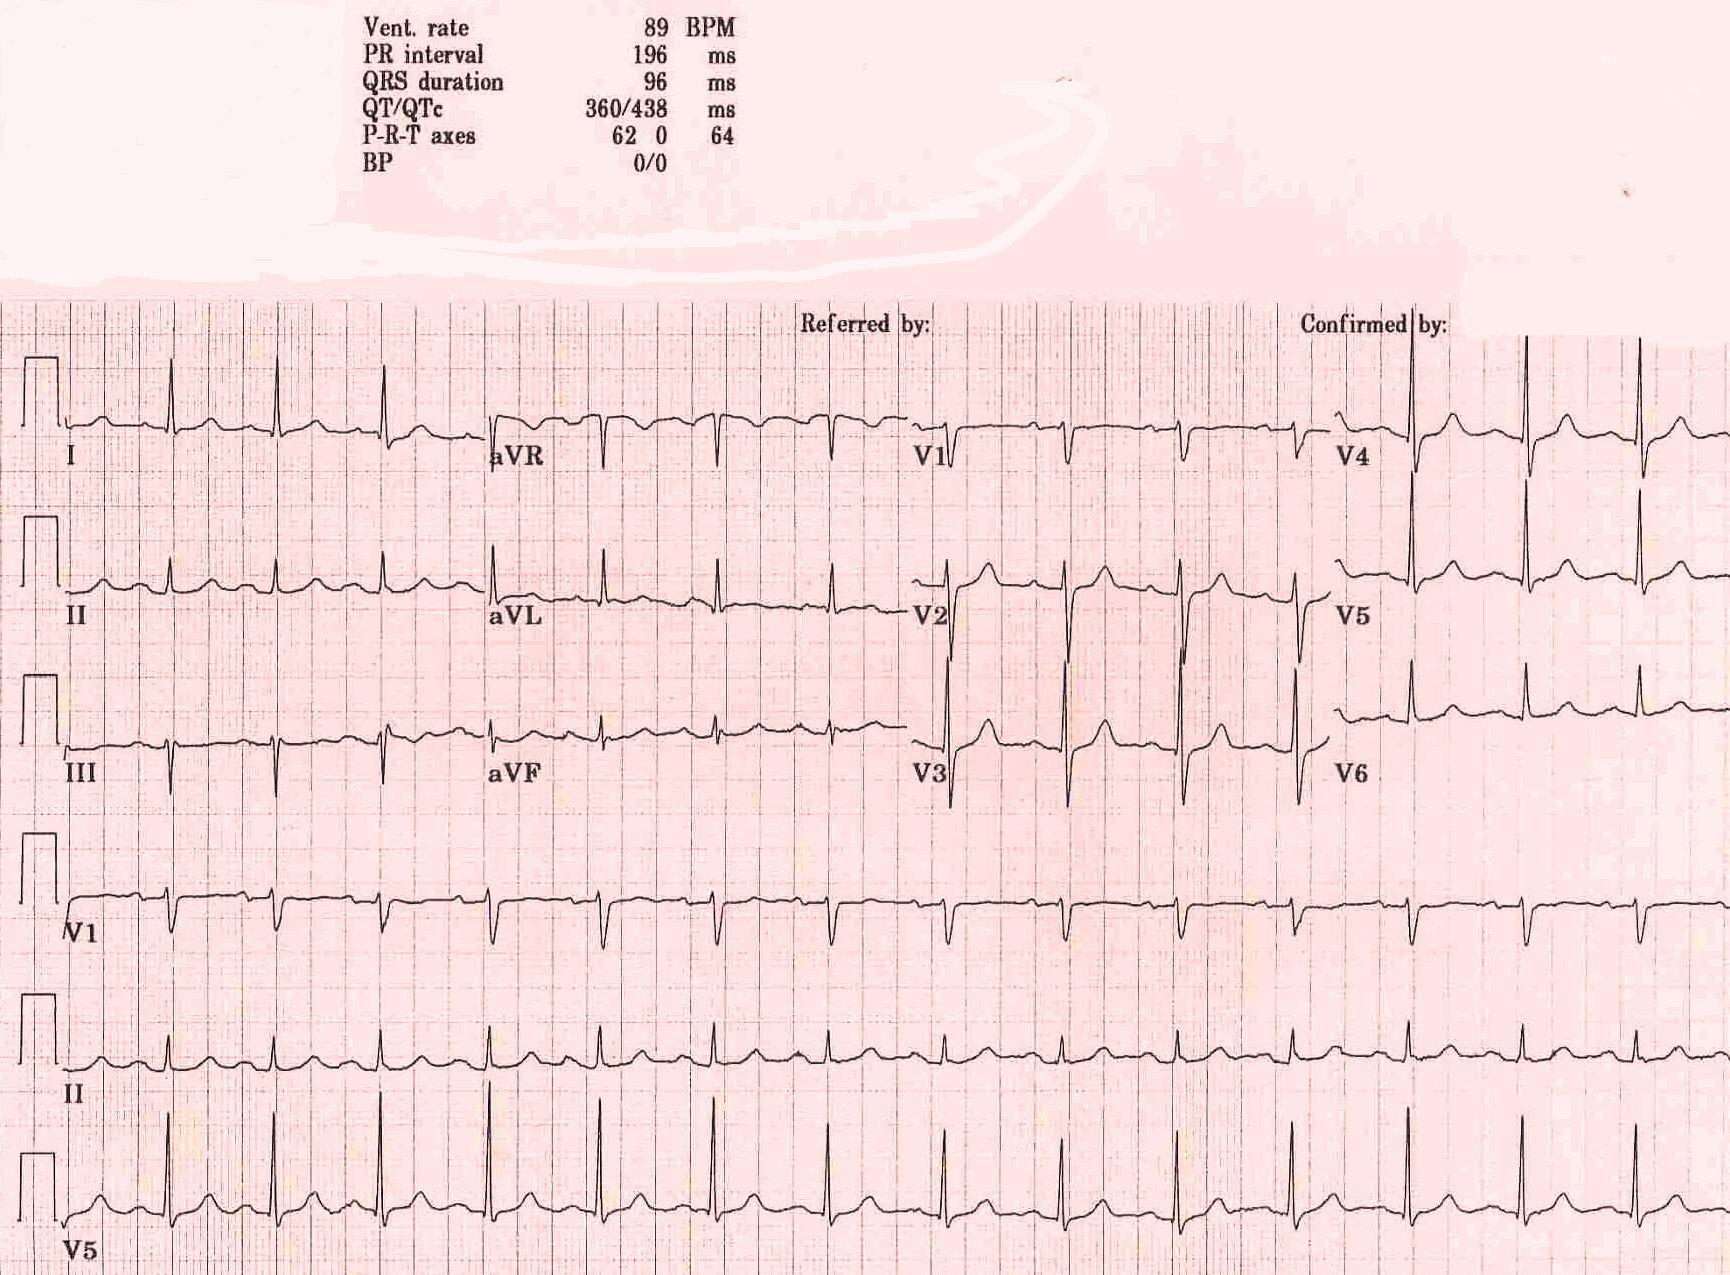 First degree AV block is a misnomer in that every P wave is conducted to the ventricles, however, with a PR interval exceeding 200 msec. Prolonged PR conduction, a more appropriate classification for this conduction disturbance, may be the result of conduction delay within the atrium, AV node, bundle of His or bundle branches. Prolongation of the PR interval most often indicates AV nodal conduction delay.